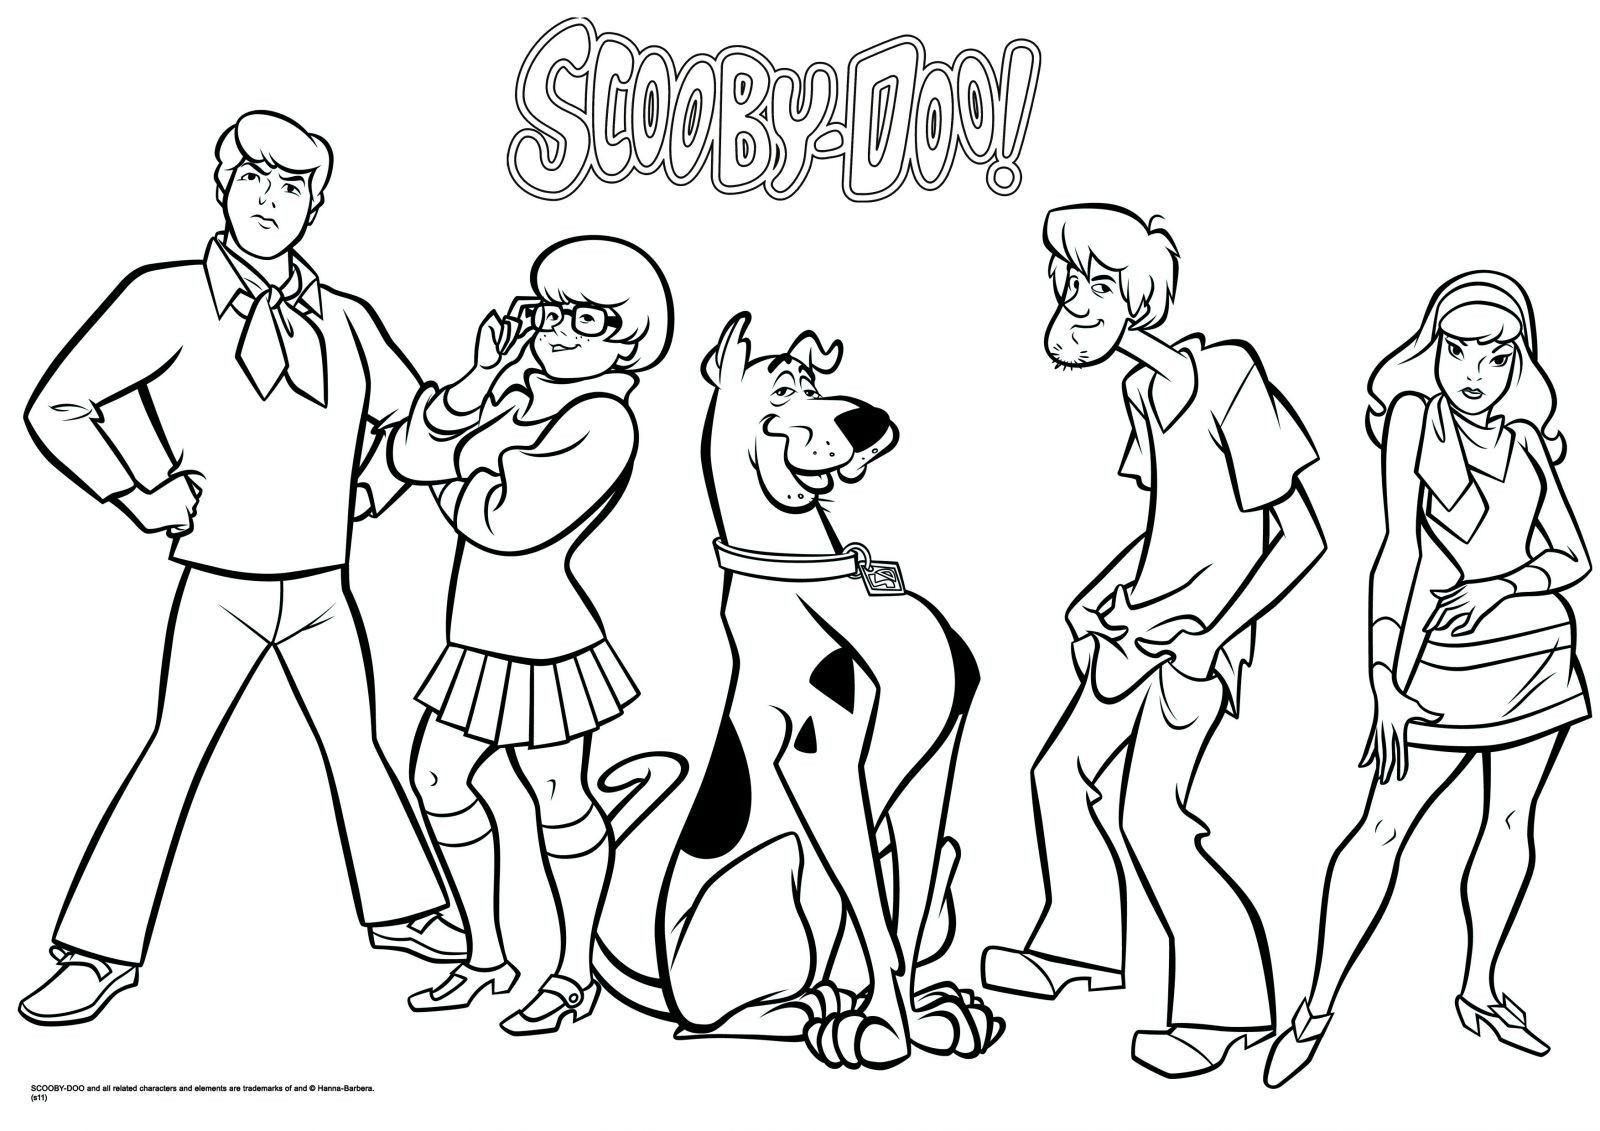 Scooby Doo Monster Coloring Pages at GetColorings.com | Free printable ...